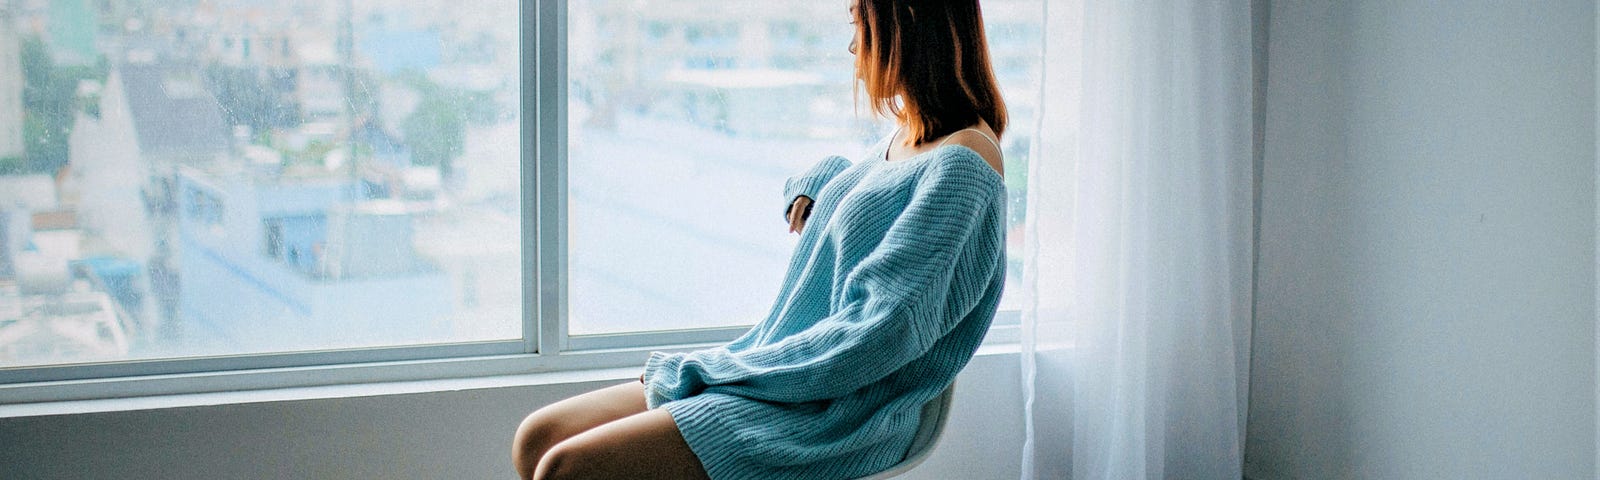 somber girl with brown hair wearing long sleeve blue sweater sitting on chair in empty room looking out the window